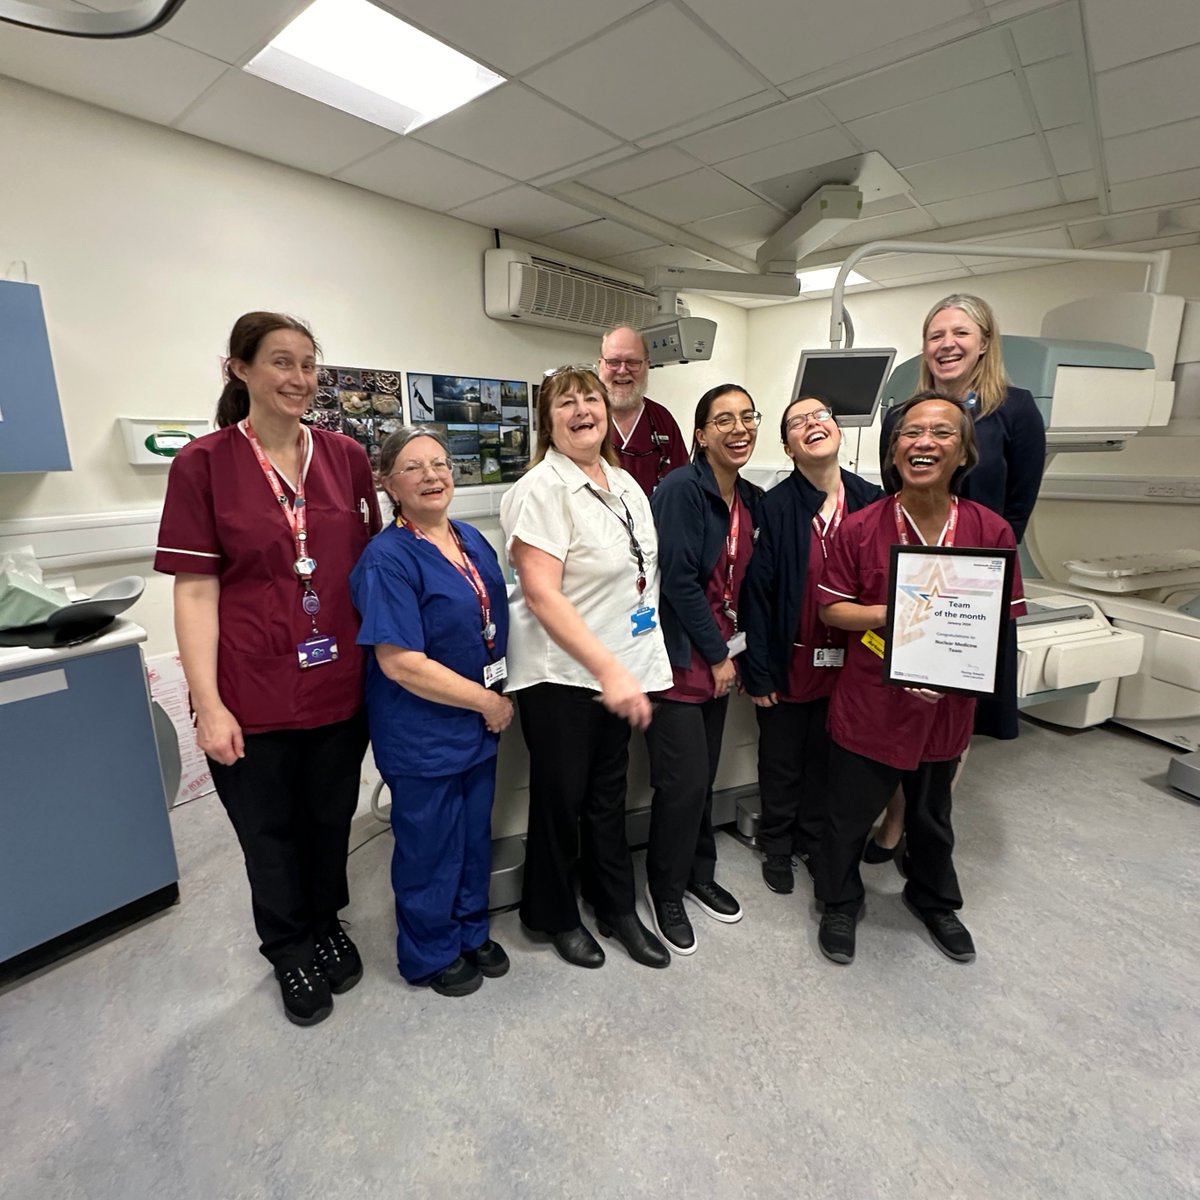 Congratulations to the Nuclear Medicine Team who recently were awarded our Team of the Month Award 🎉 If you'd like to nominate an individual or team for our monthly staff awards, you can do so by filling out this form 👉 forms.office.com/e/ZyHwbnSxFi